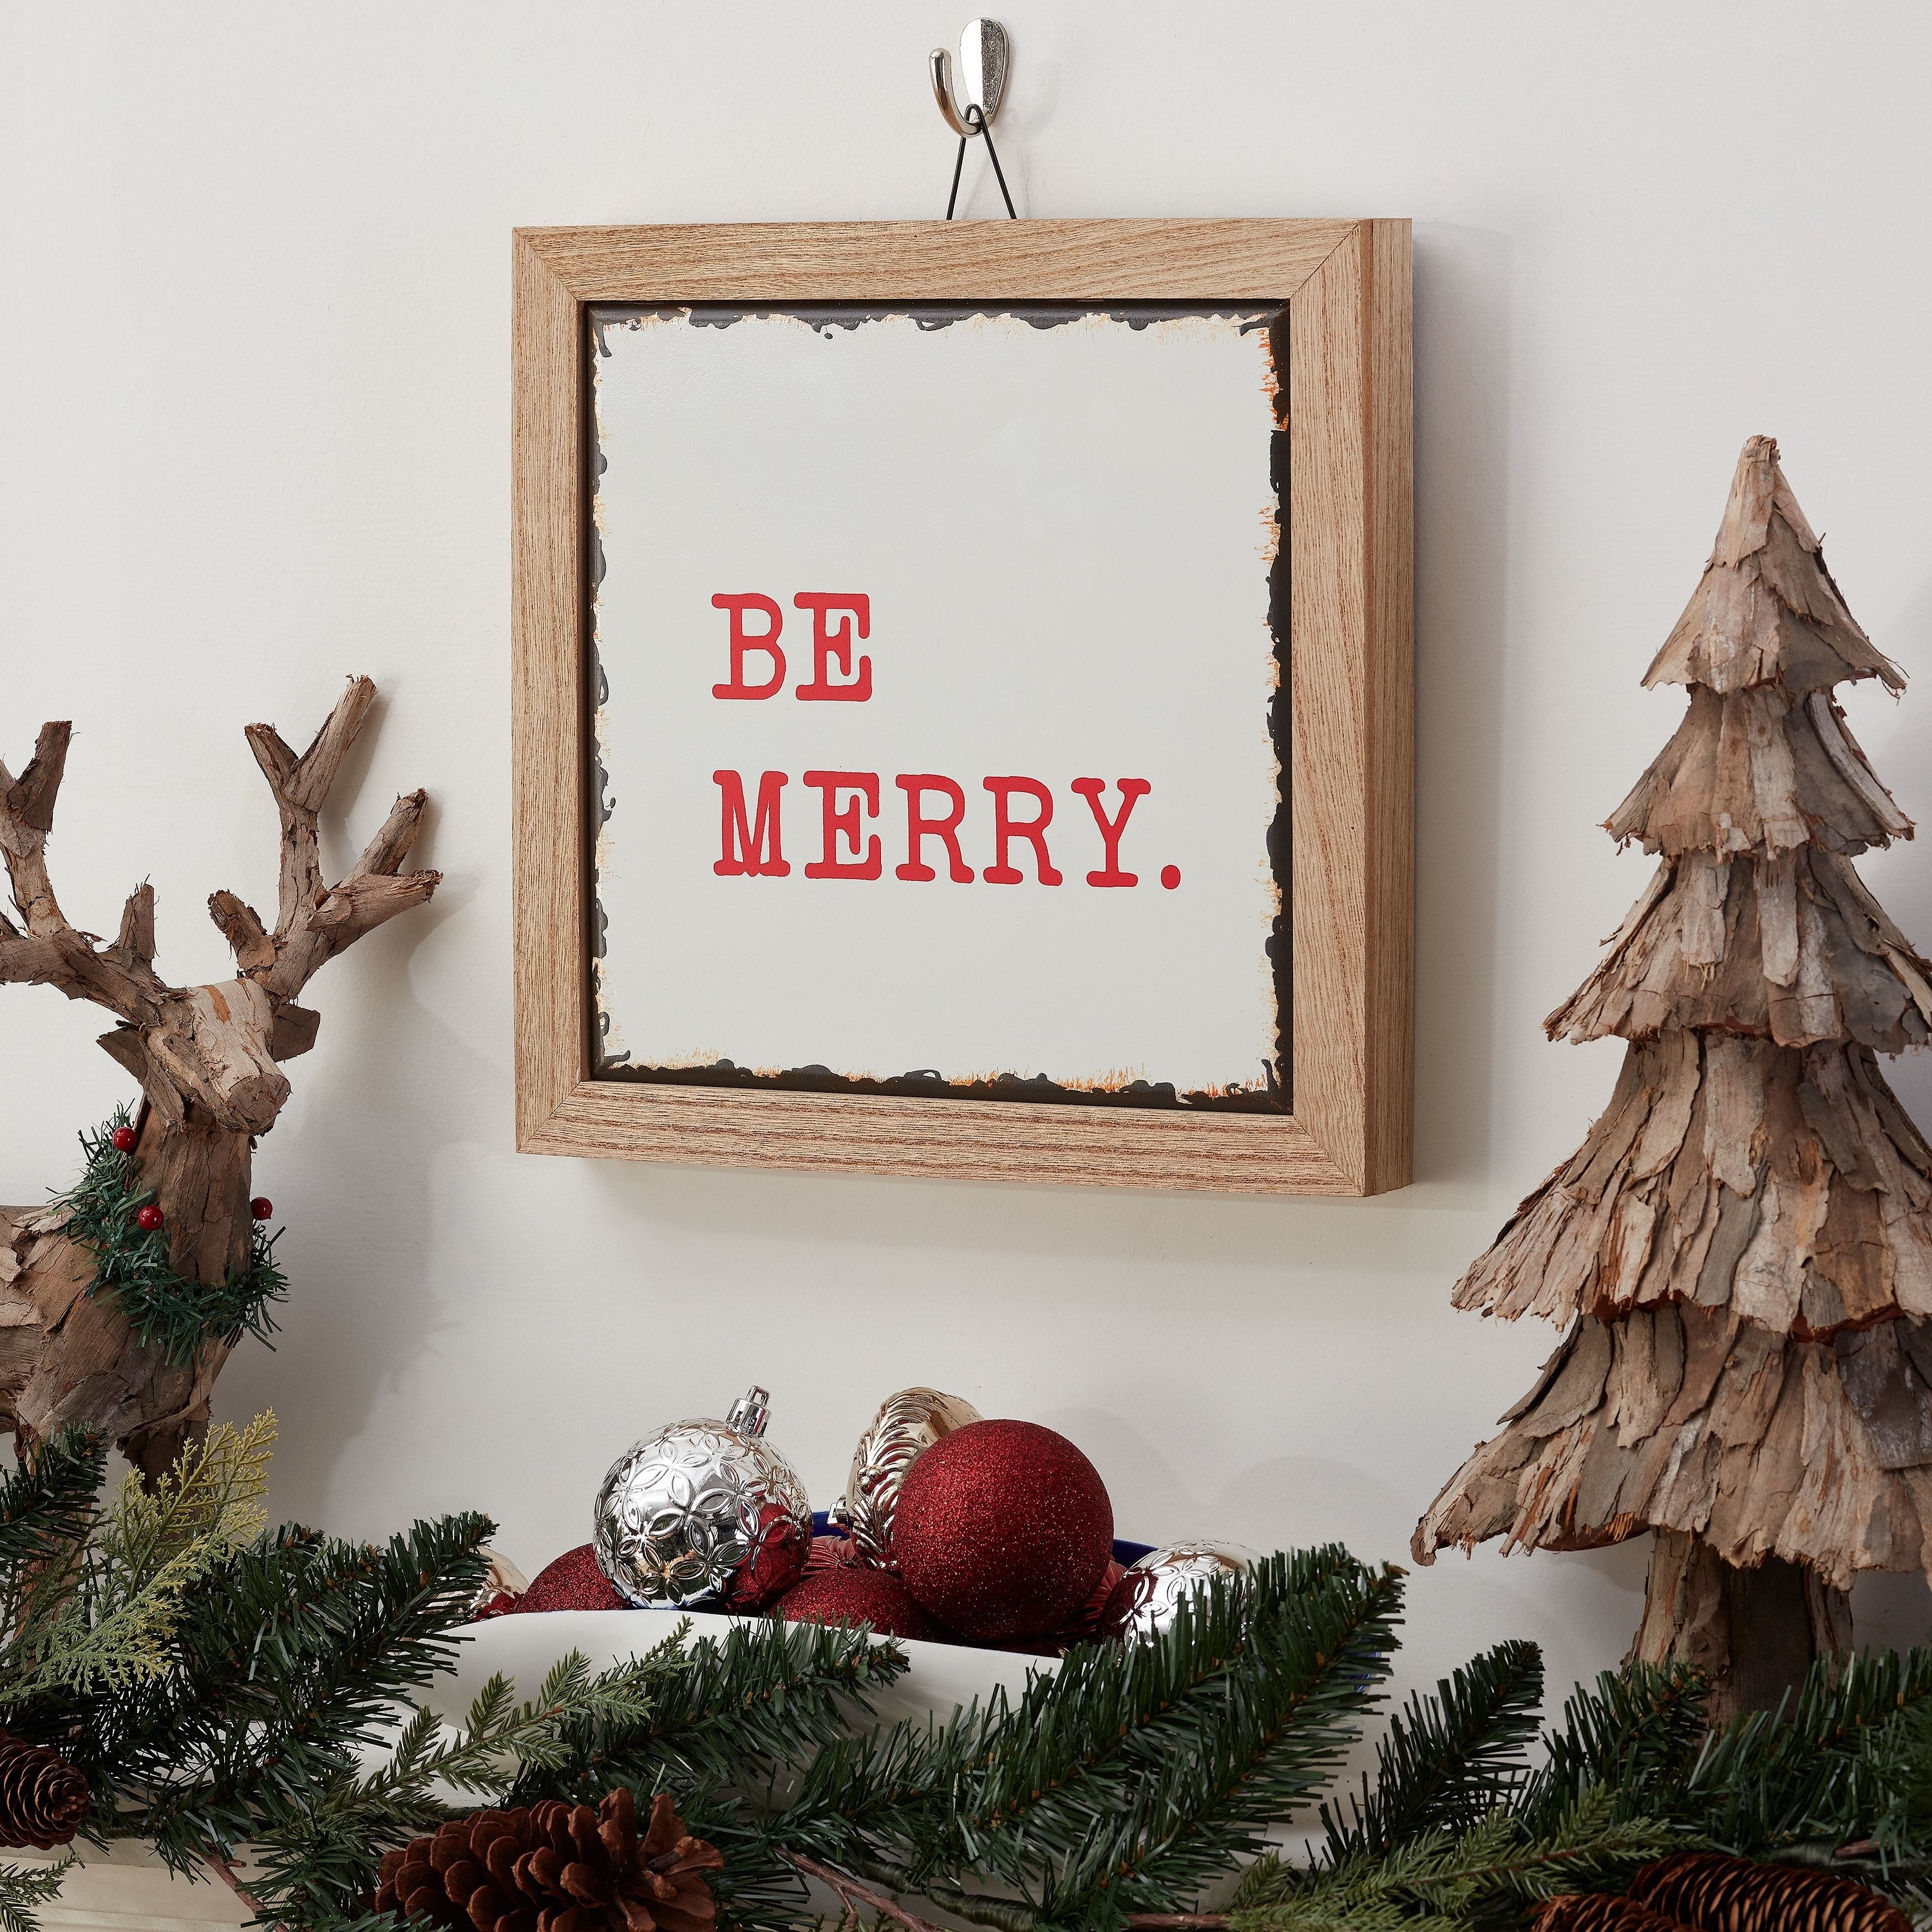 The sign hung on a wall beside several rustic holiday decorations